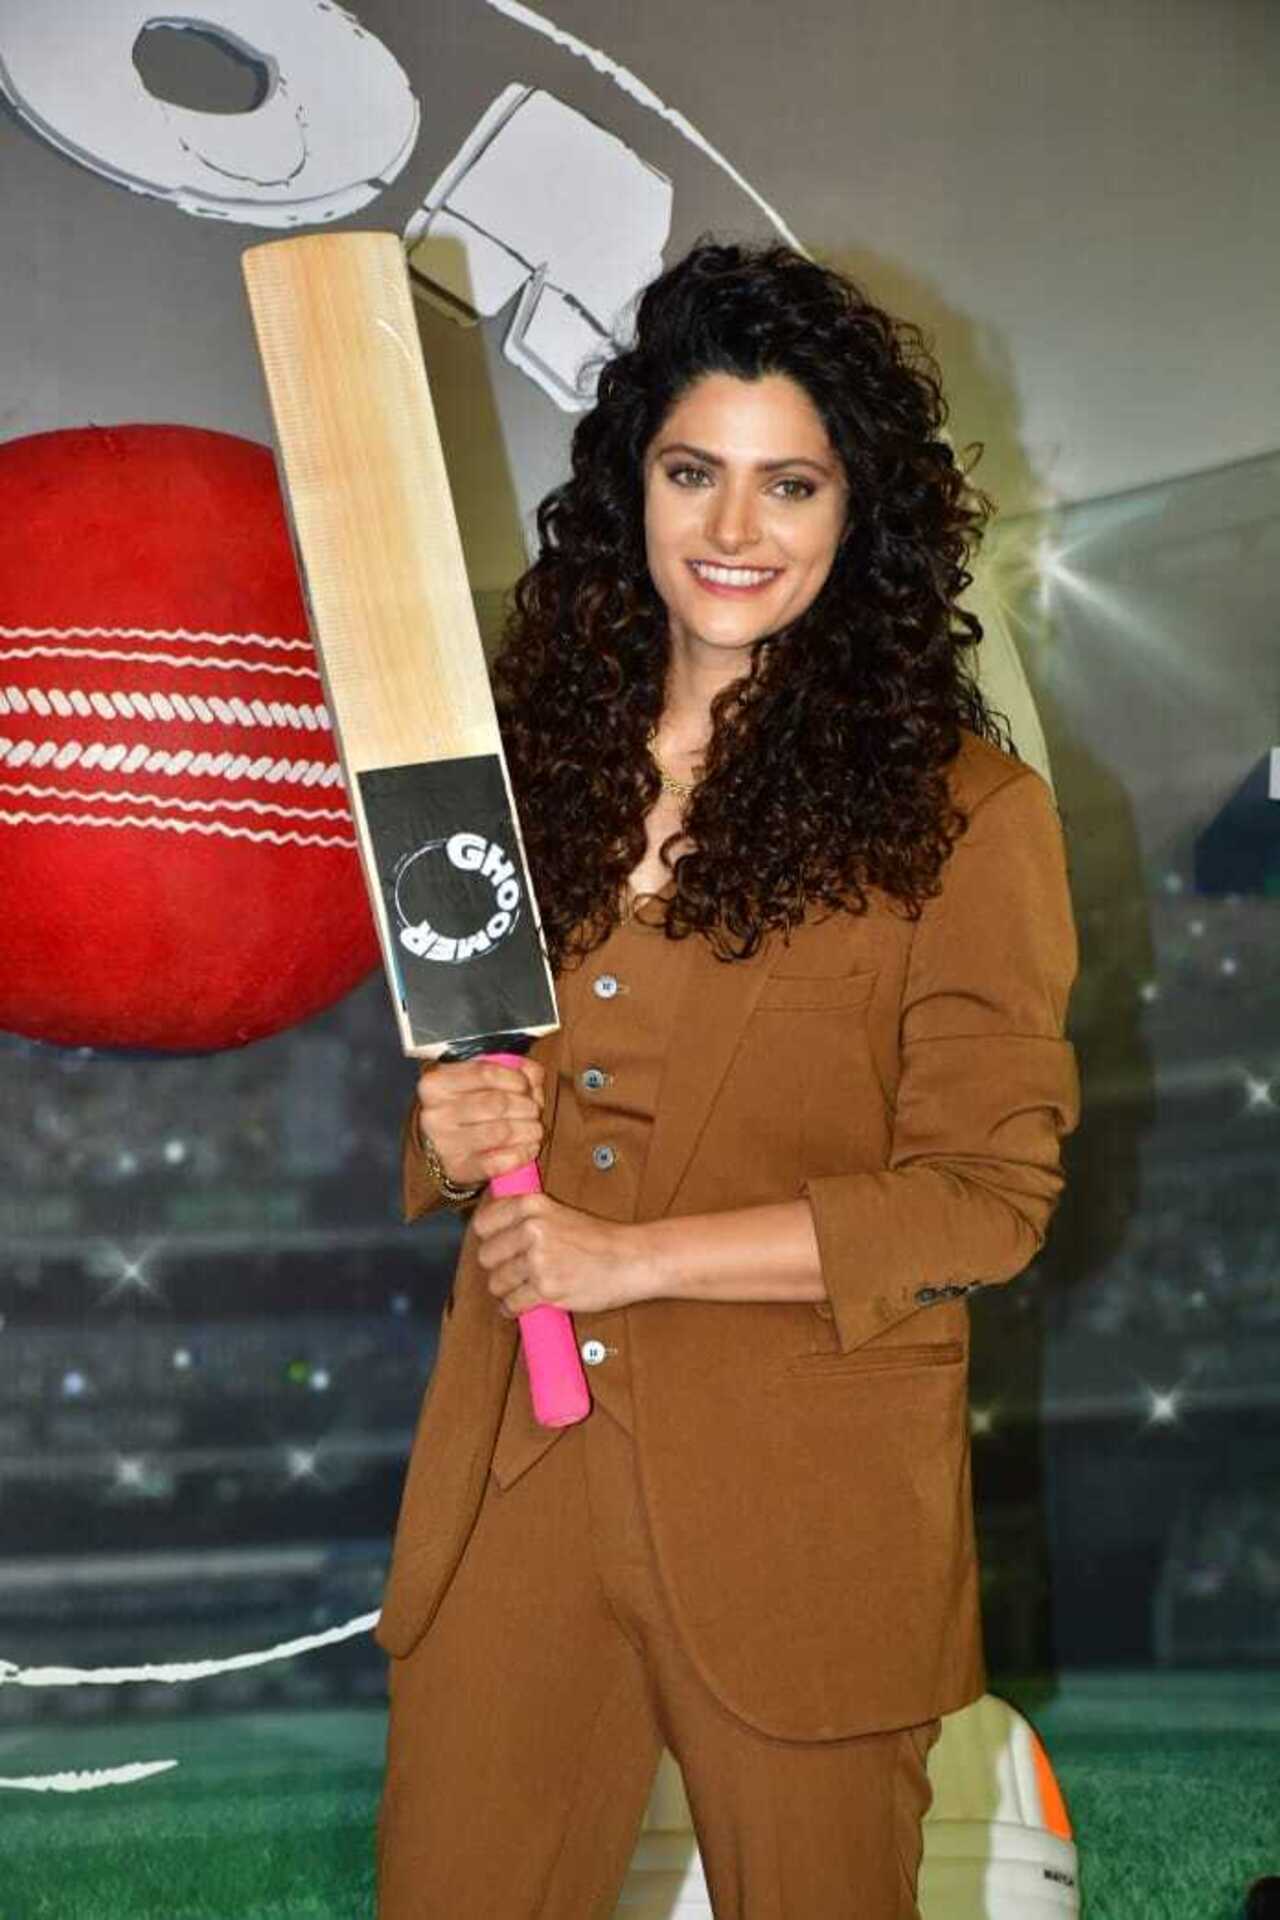 Saiyami Kher looked gorgeous in her all-brown outfit as she was clicked while attending the trailer launch event of 'Ghoomer'